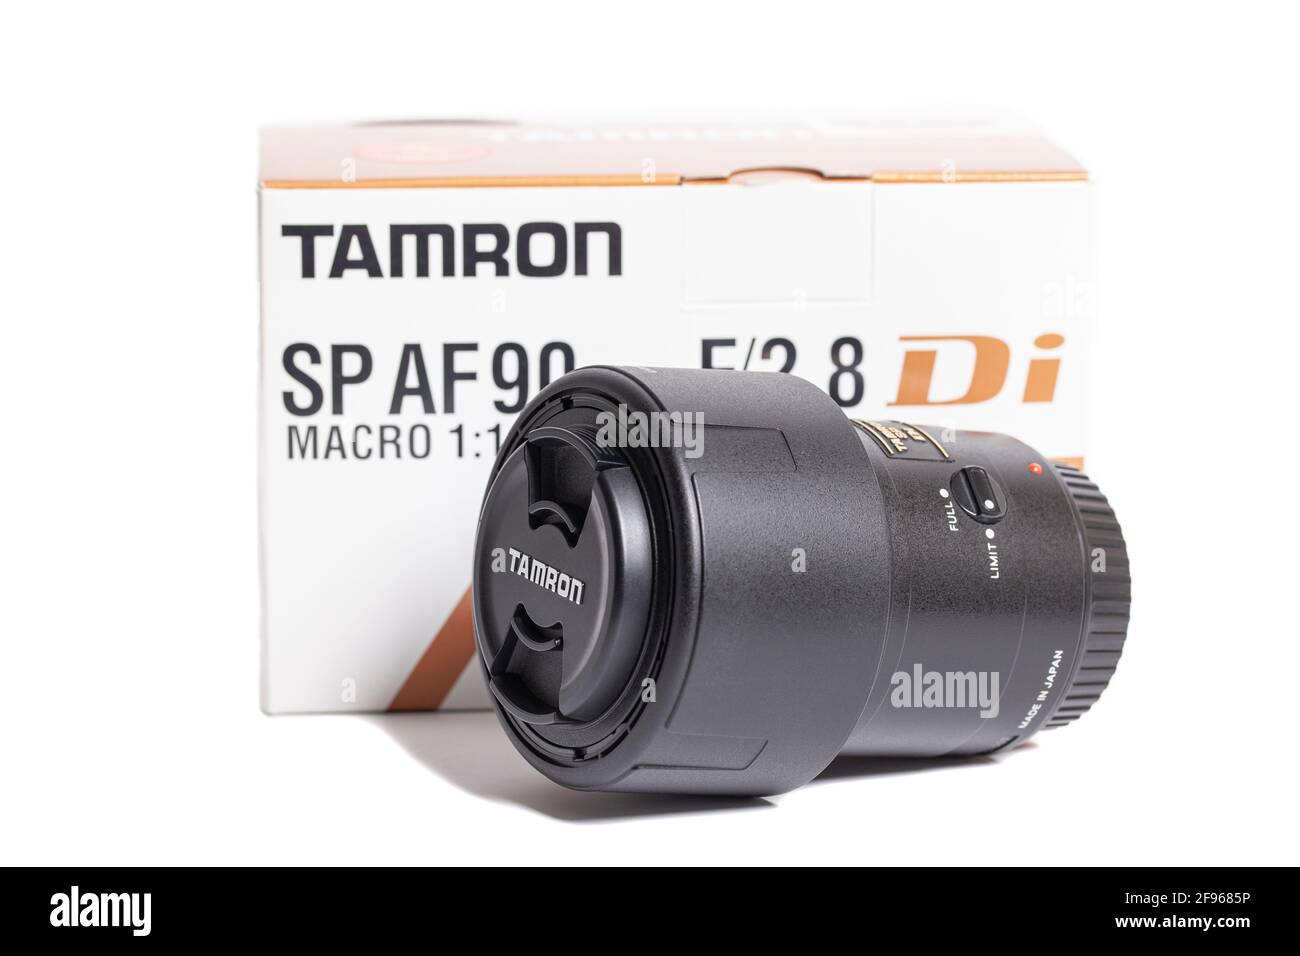 Moscow, Russia April 16,2021 Tamron SP AF 90mm f 2.8 Camera photo lens with box. Stock Photo